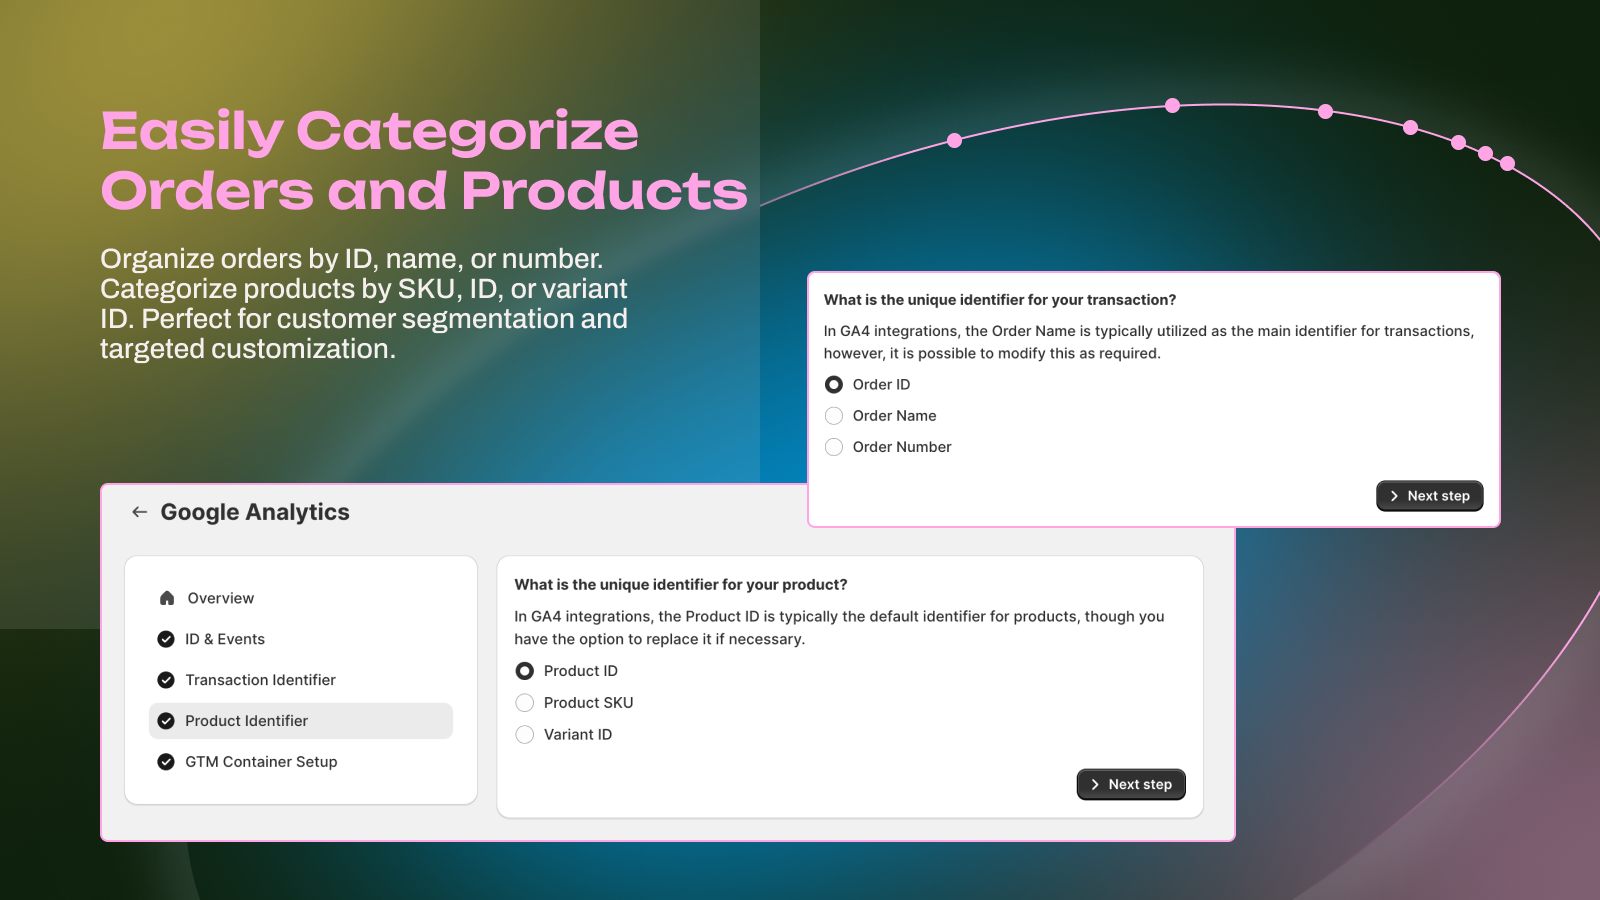 Easily categorize orders and products